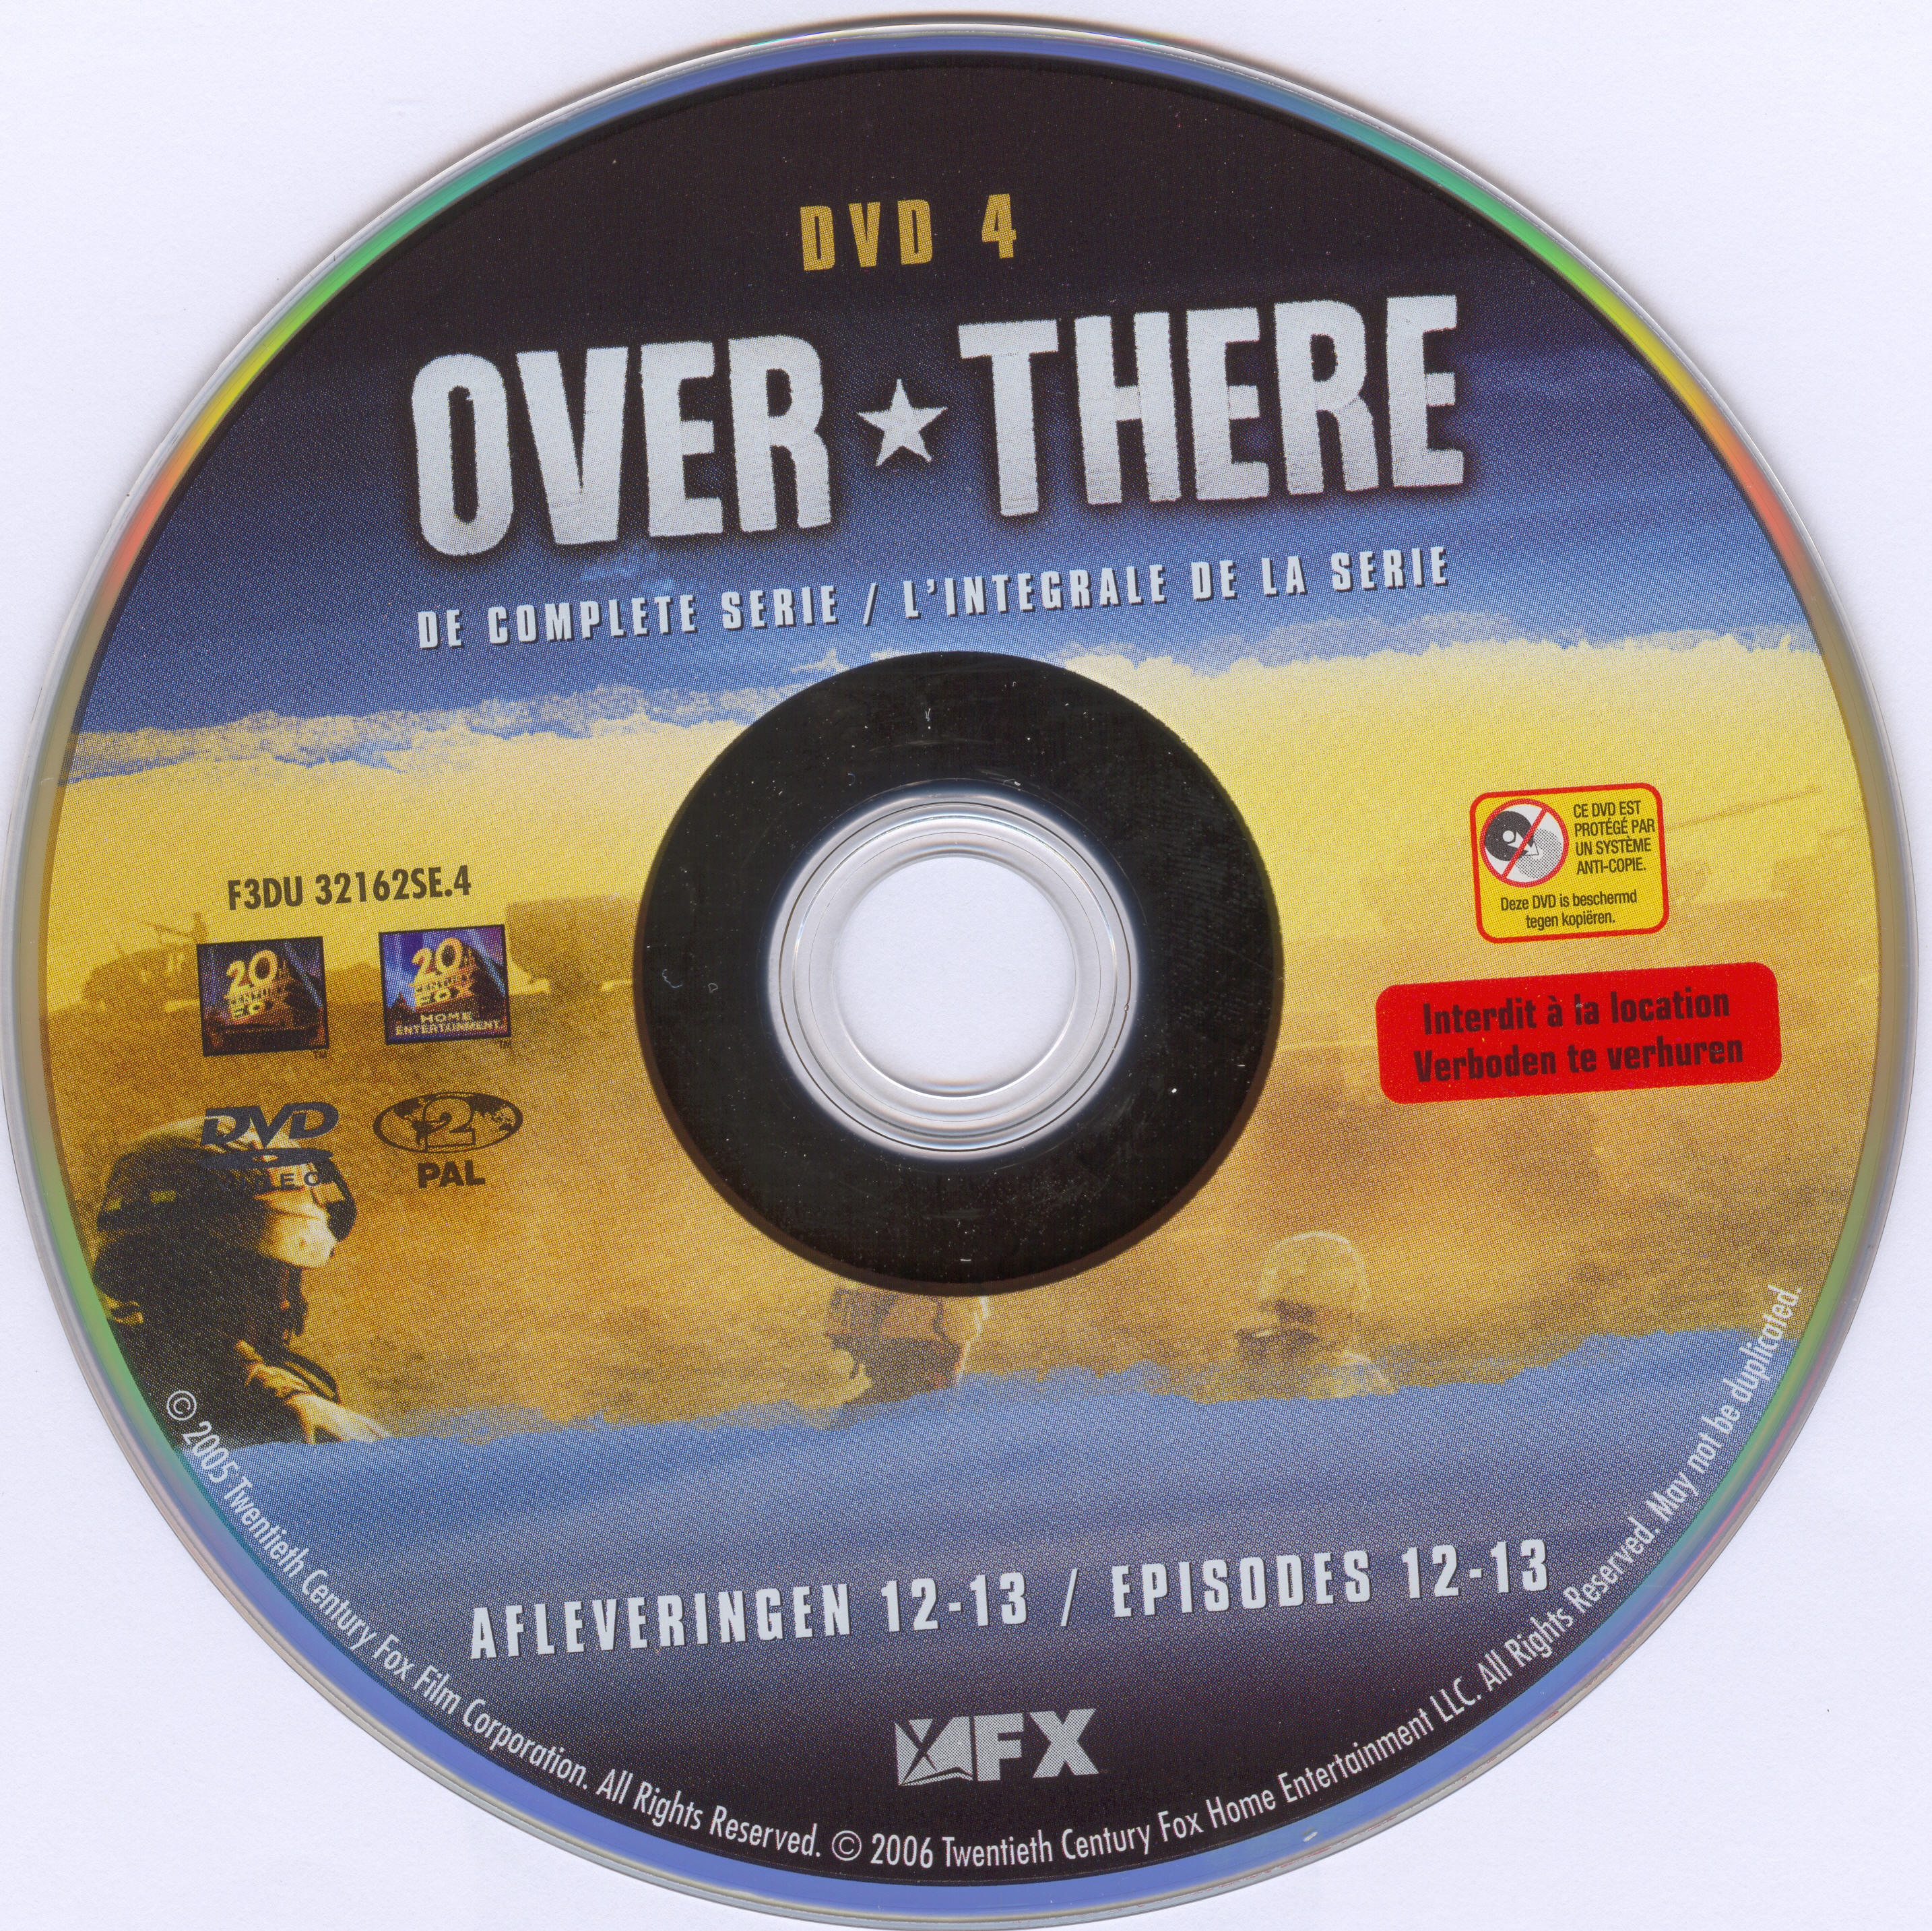 Over there DVD 4